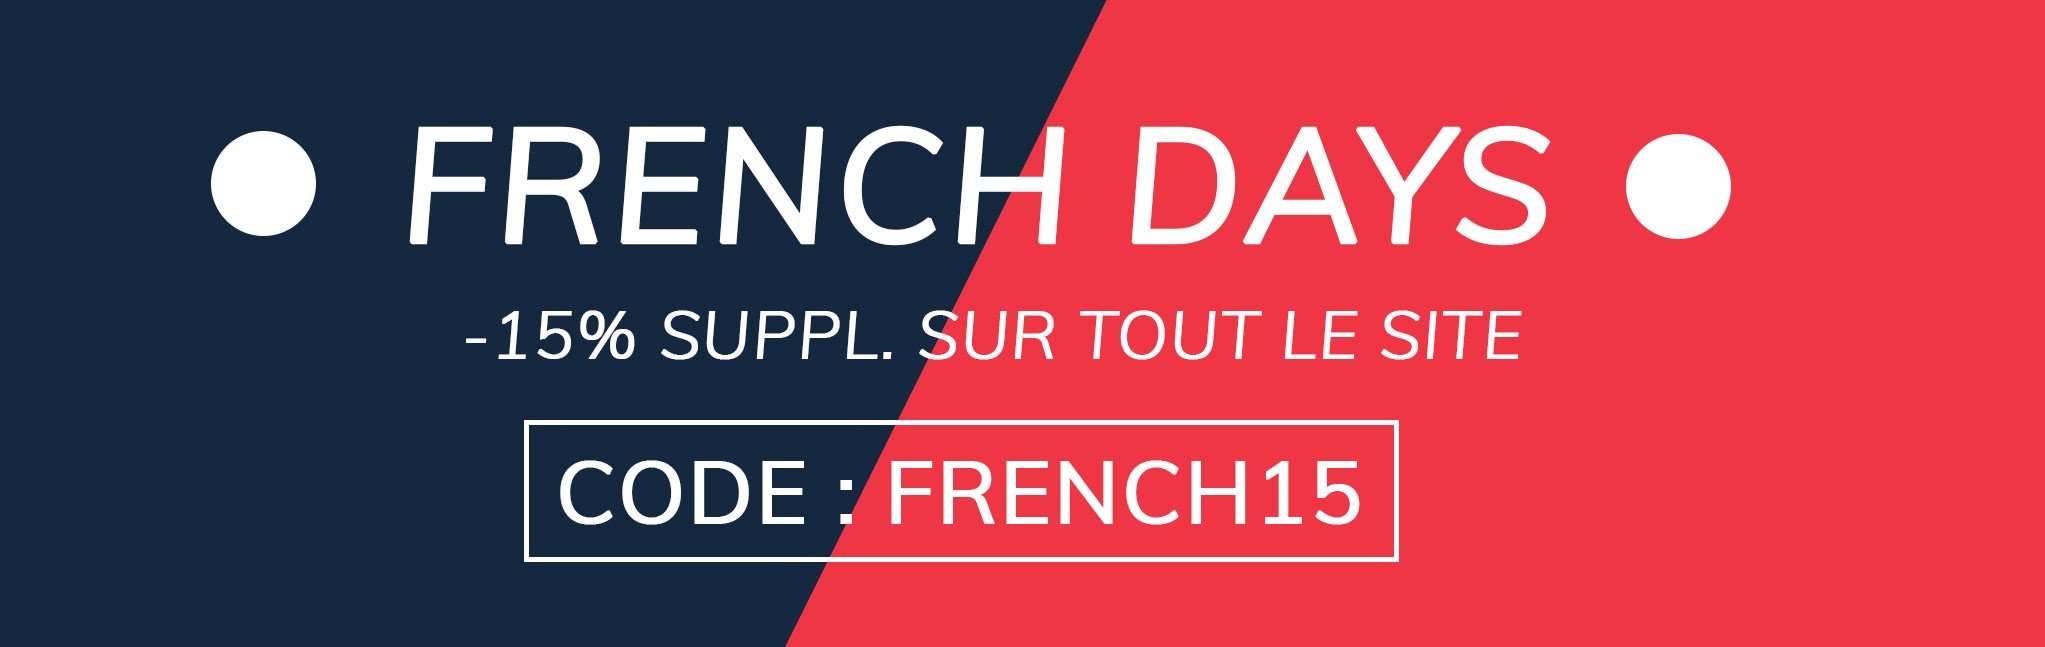 FRENCH DAYS ! 15% suppl. avec le code FRENCH15